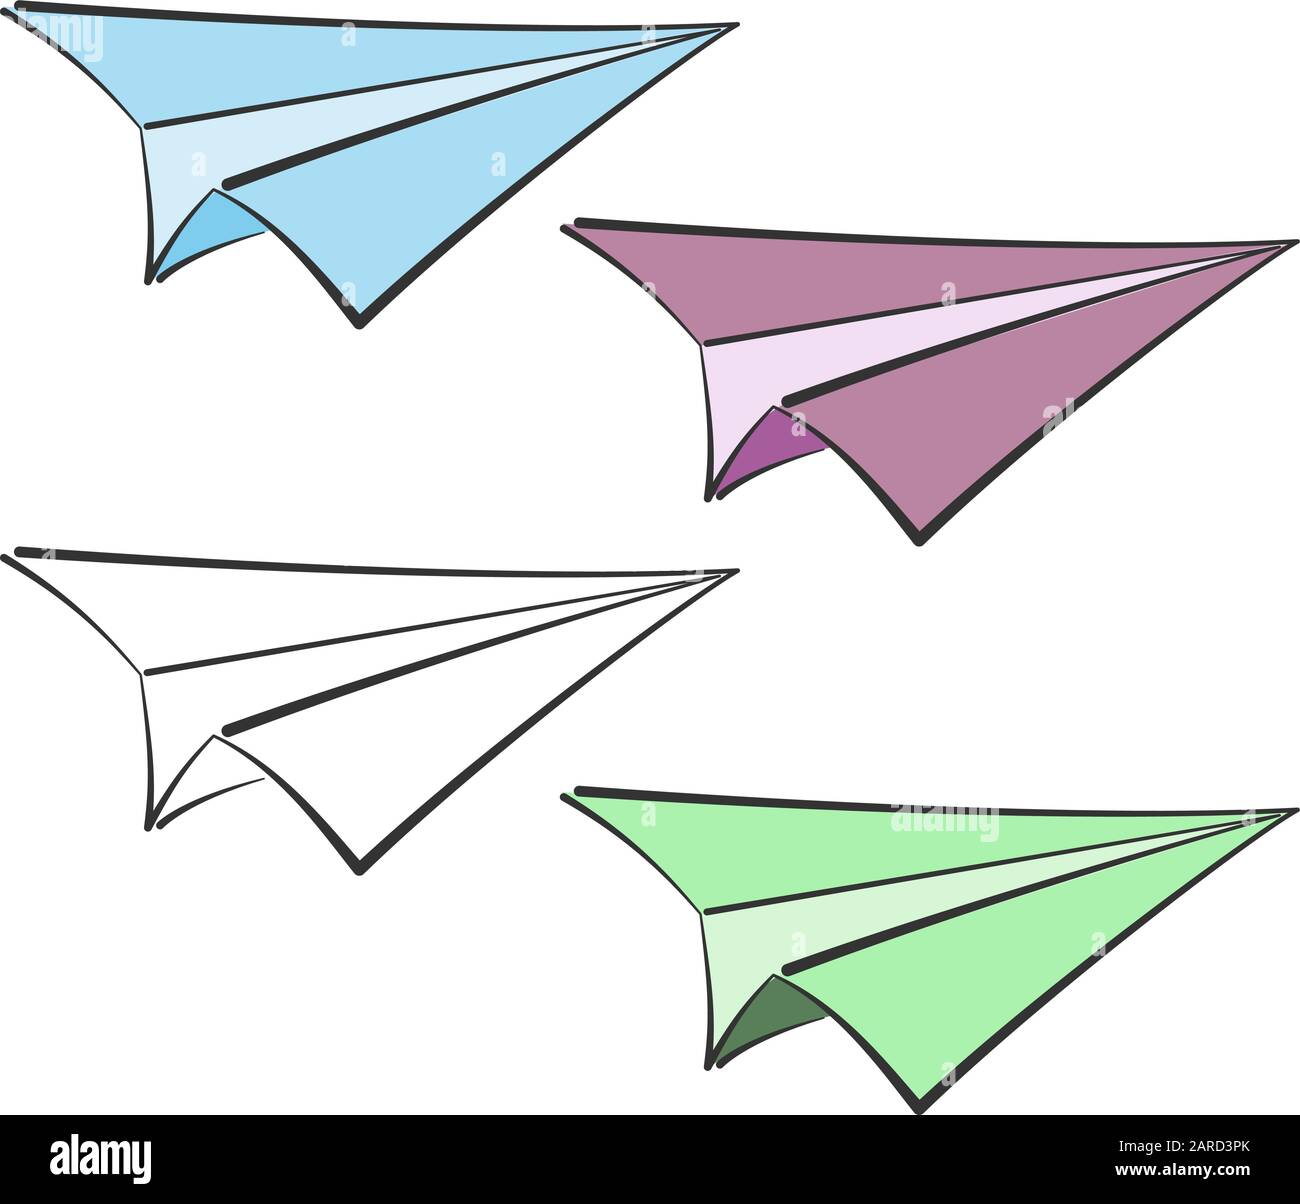 paper plane icon set, paper airplane doodle vector illustration Stock Vector